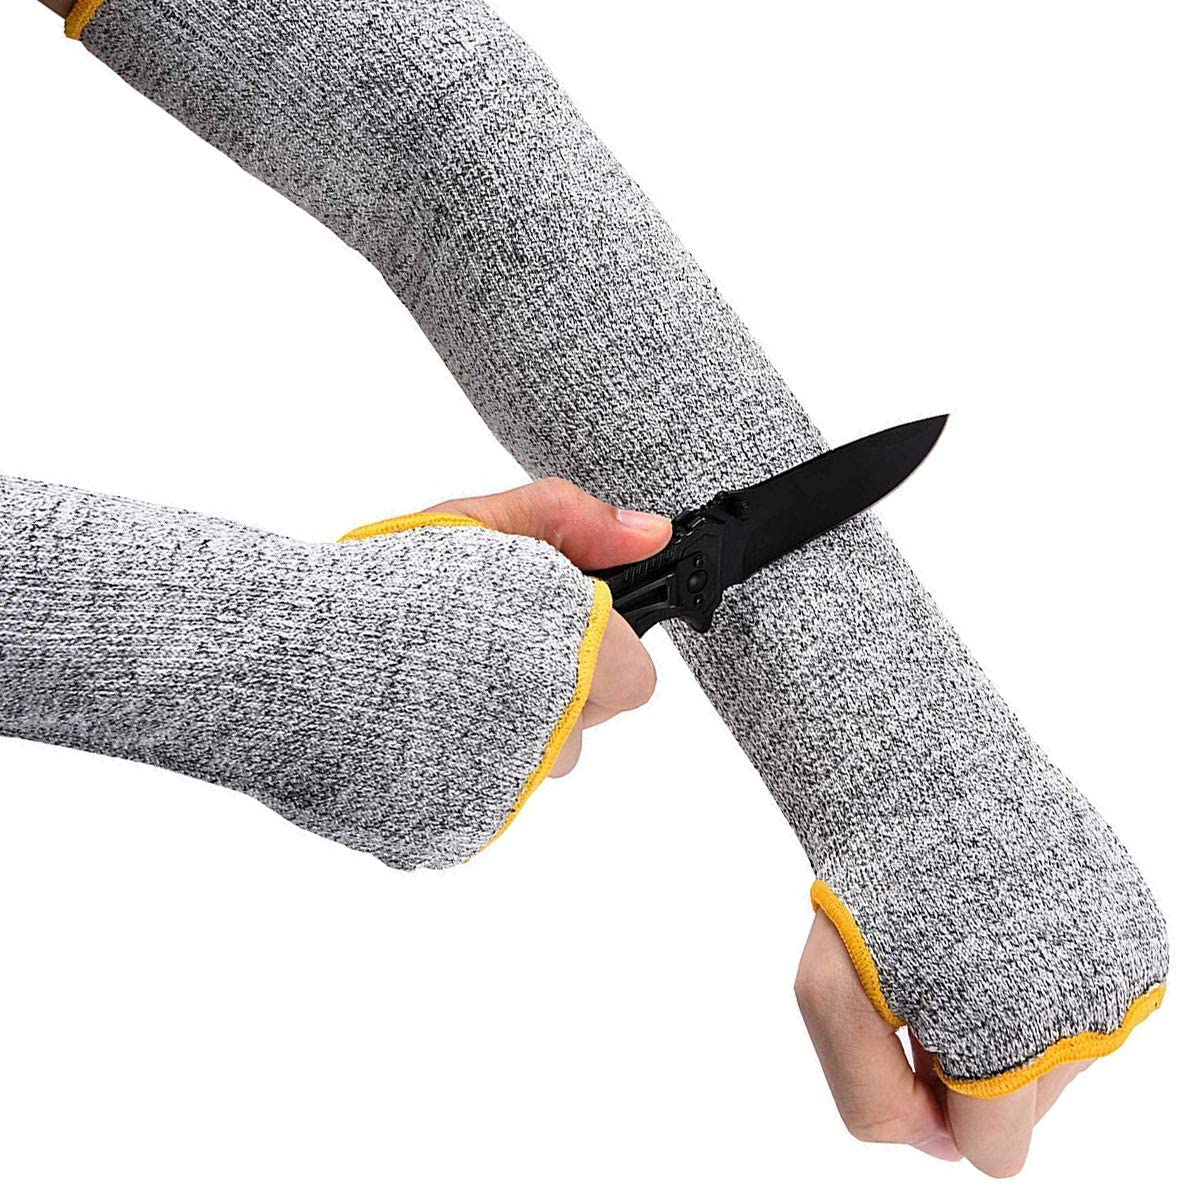 Cut Resistant Sleeves Level 5 Protection Arm Safety Sleeve Cutproof for Garding